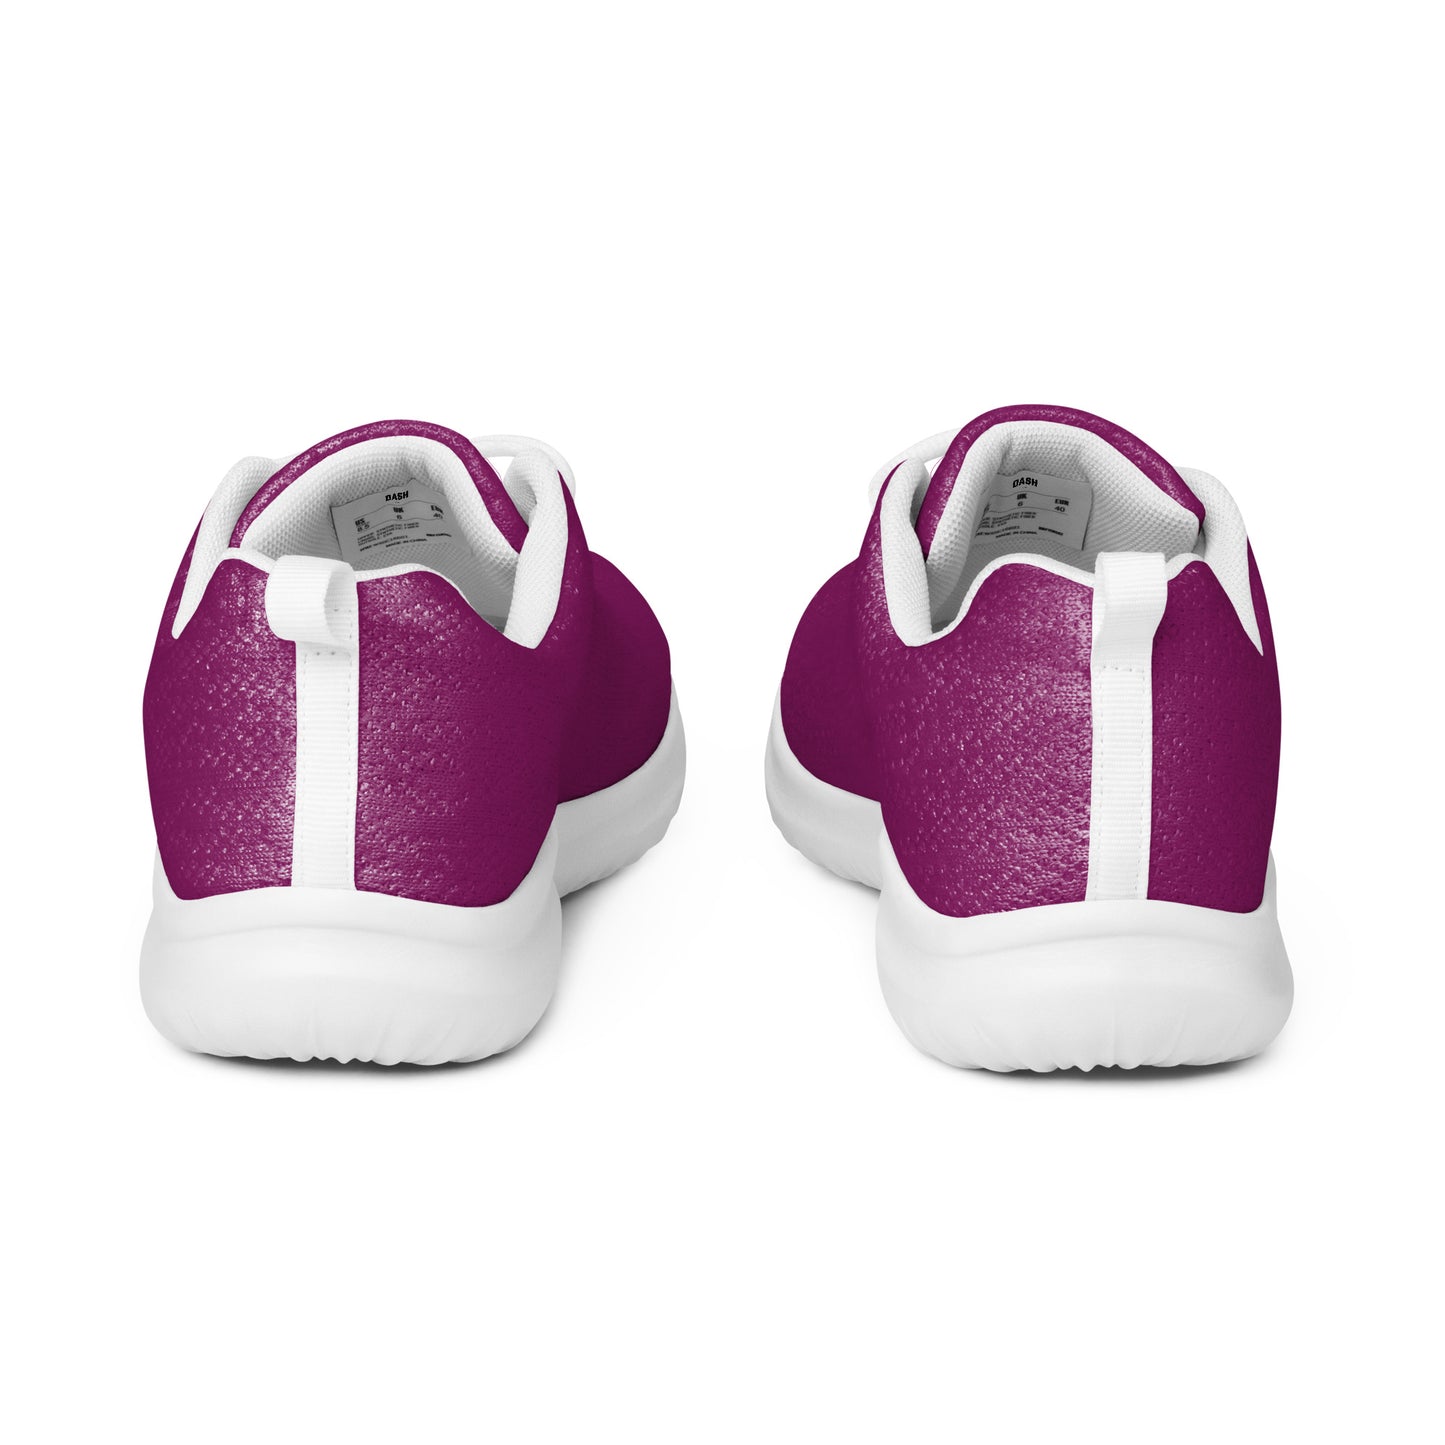 DASH Berry Women’s Athletic Shoes Lightweight Breathable Design by IOBI Original Apparel